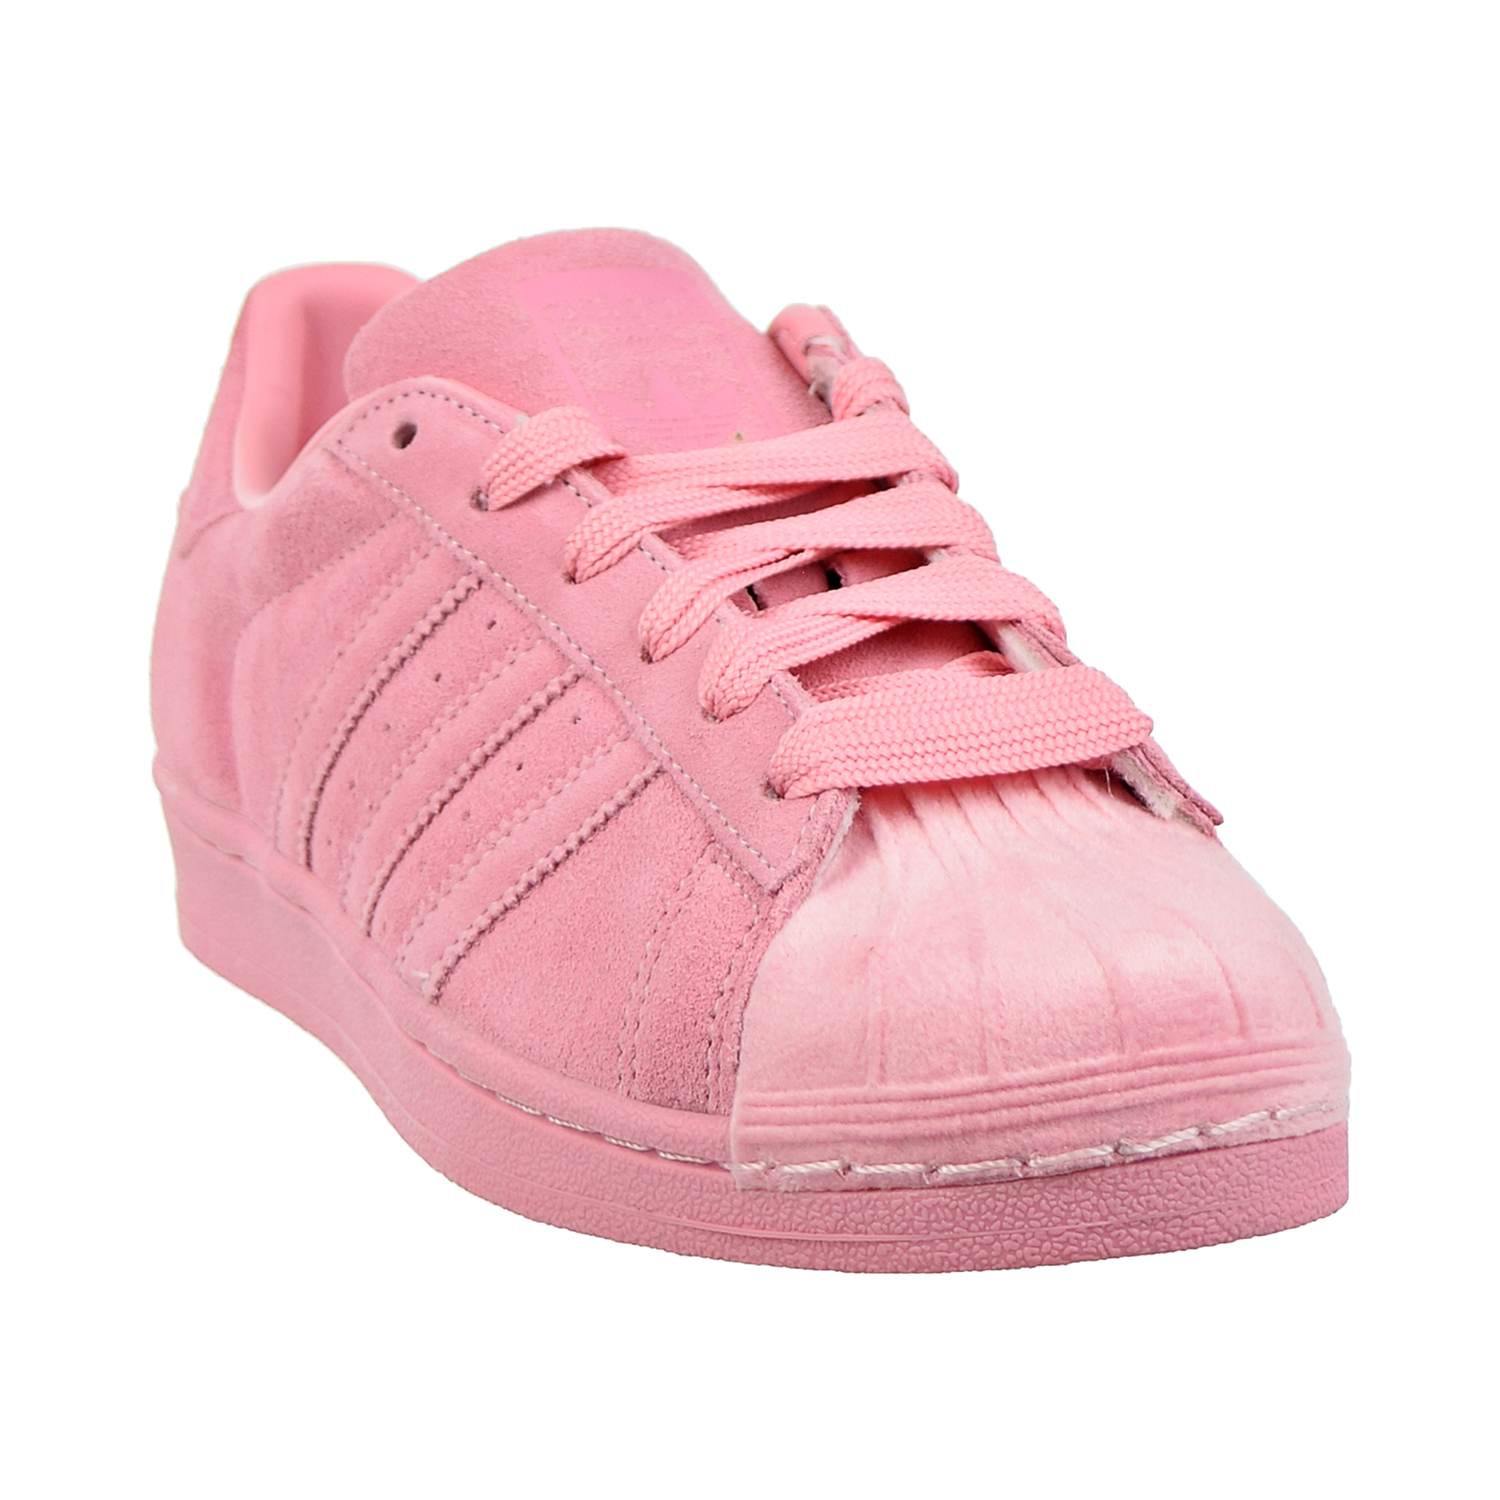 Adidas Superstar Womens Shoes Clear Pink-Clear Pink-Clear Pink cg6004